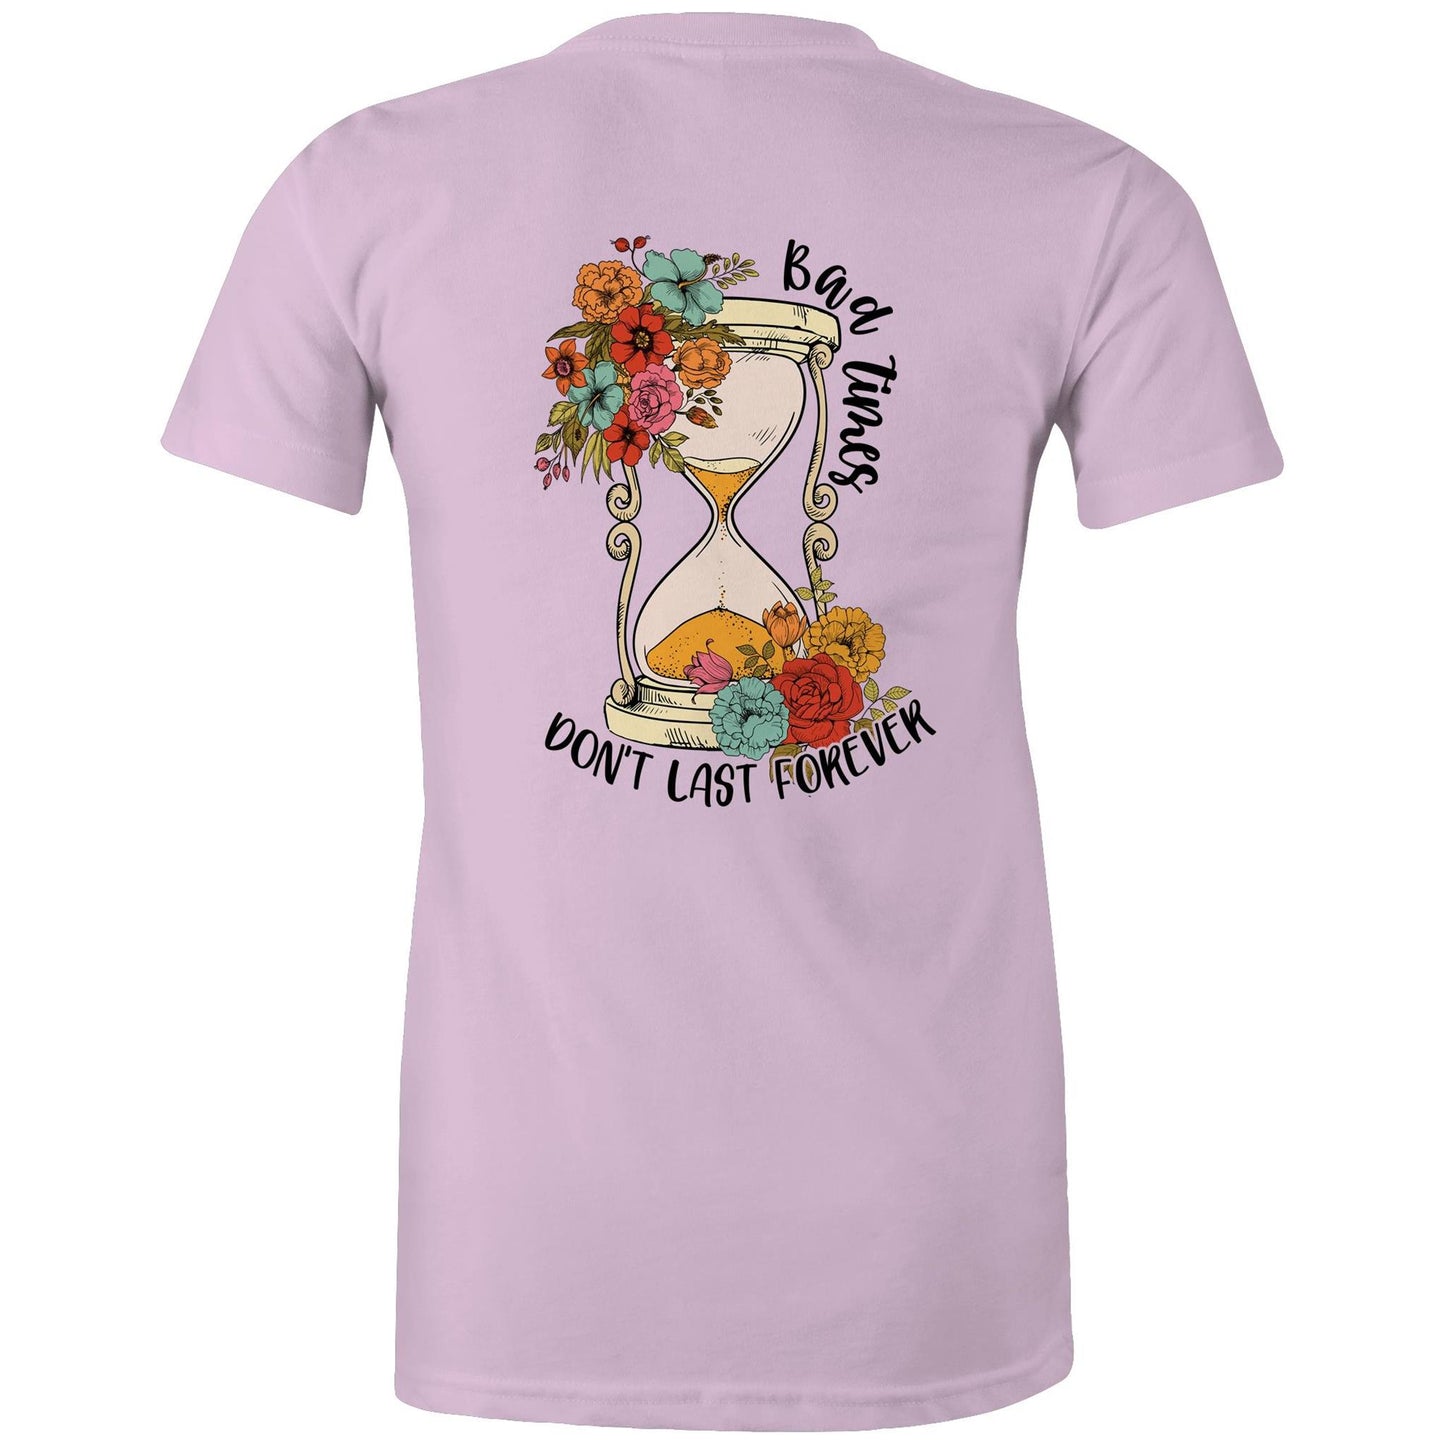 Womens Tee - Dont Last Forever (Back)